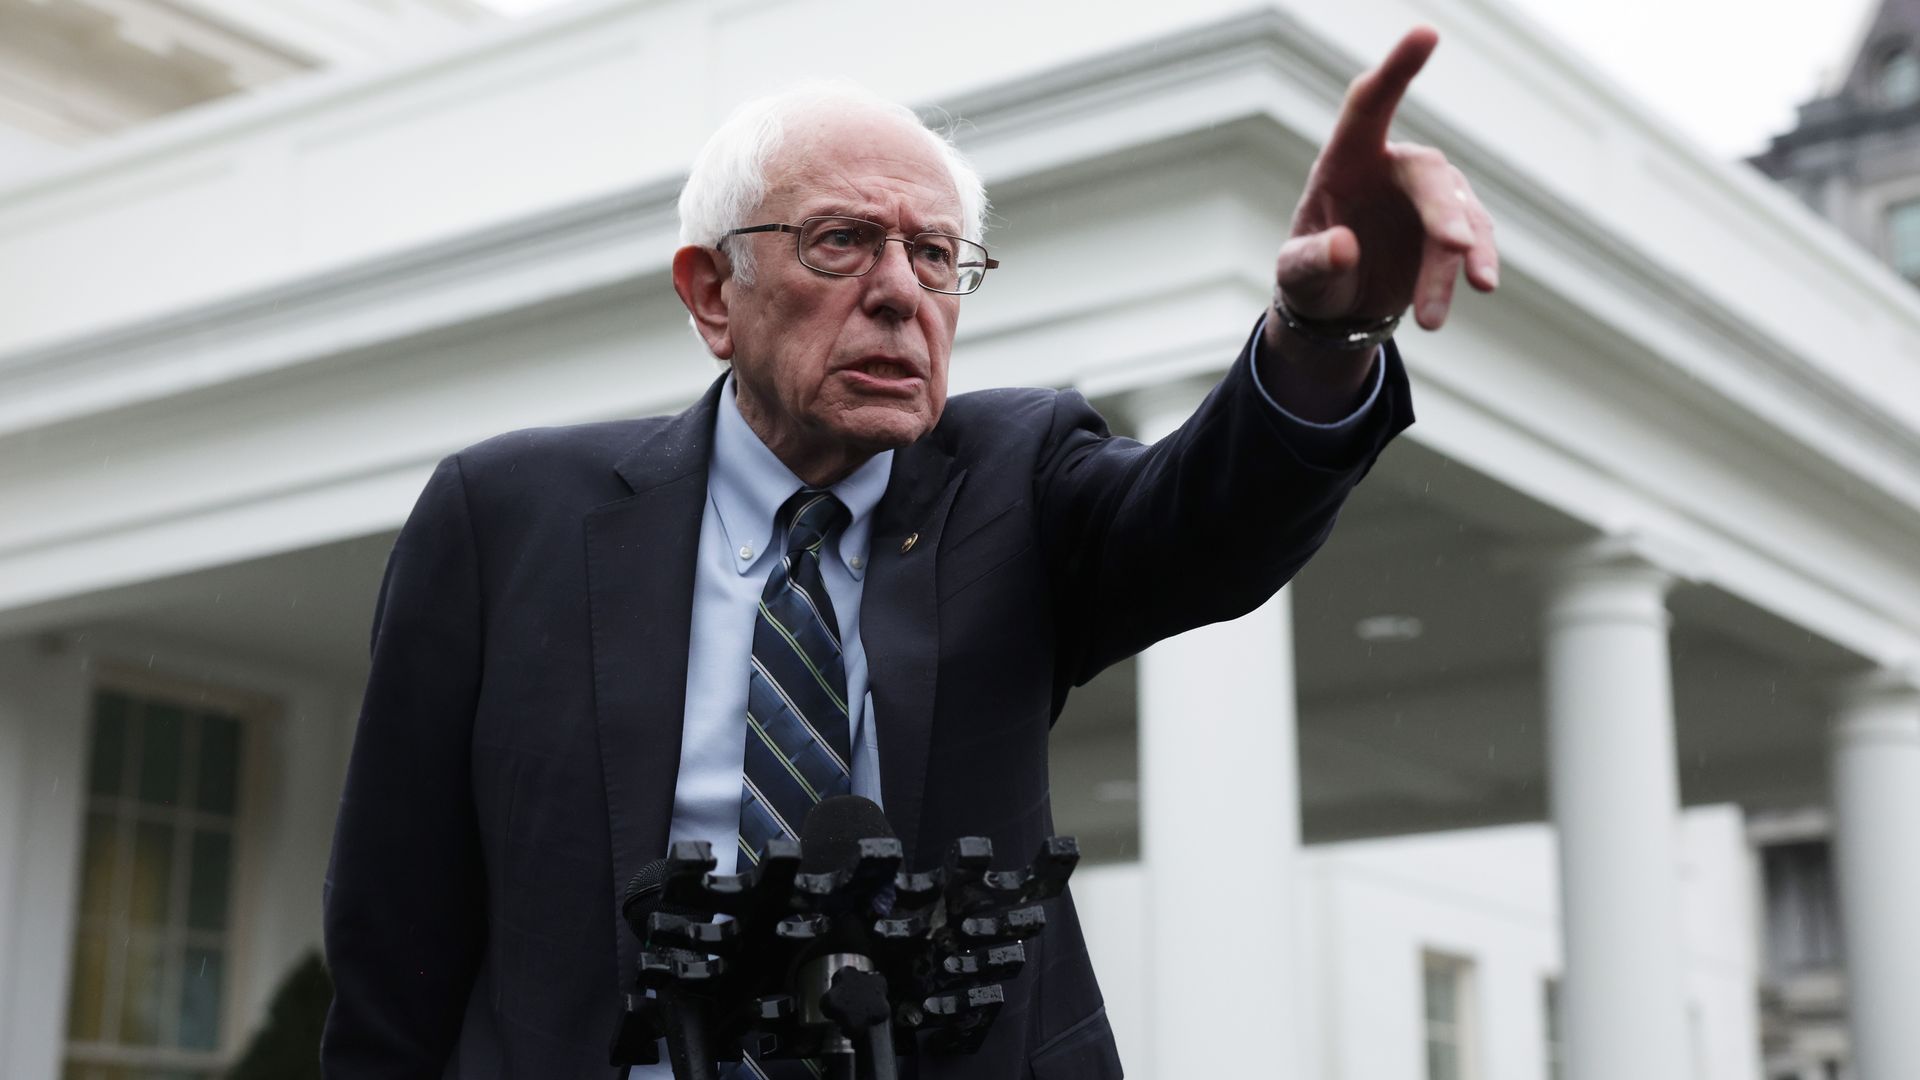 Sen. Bernie Sanders (I-VT) speaks to members of the press outside the West Wing of the White House on January 25, 2023.